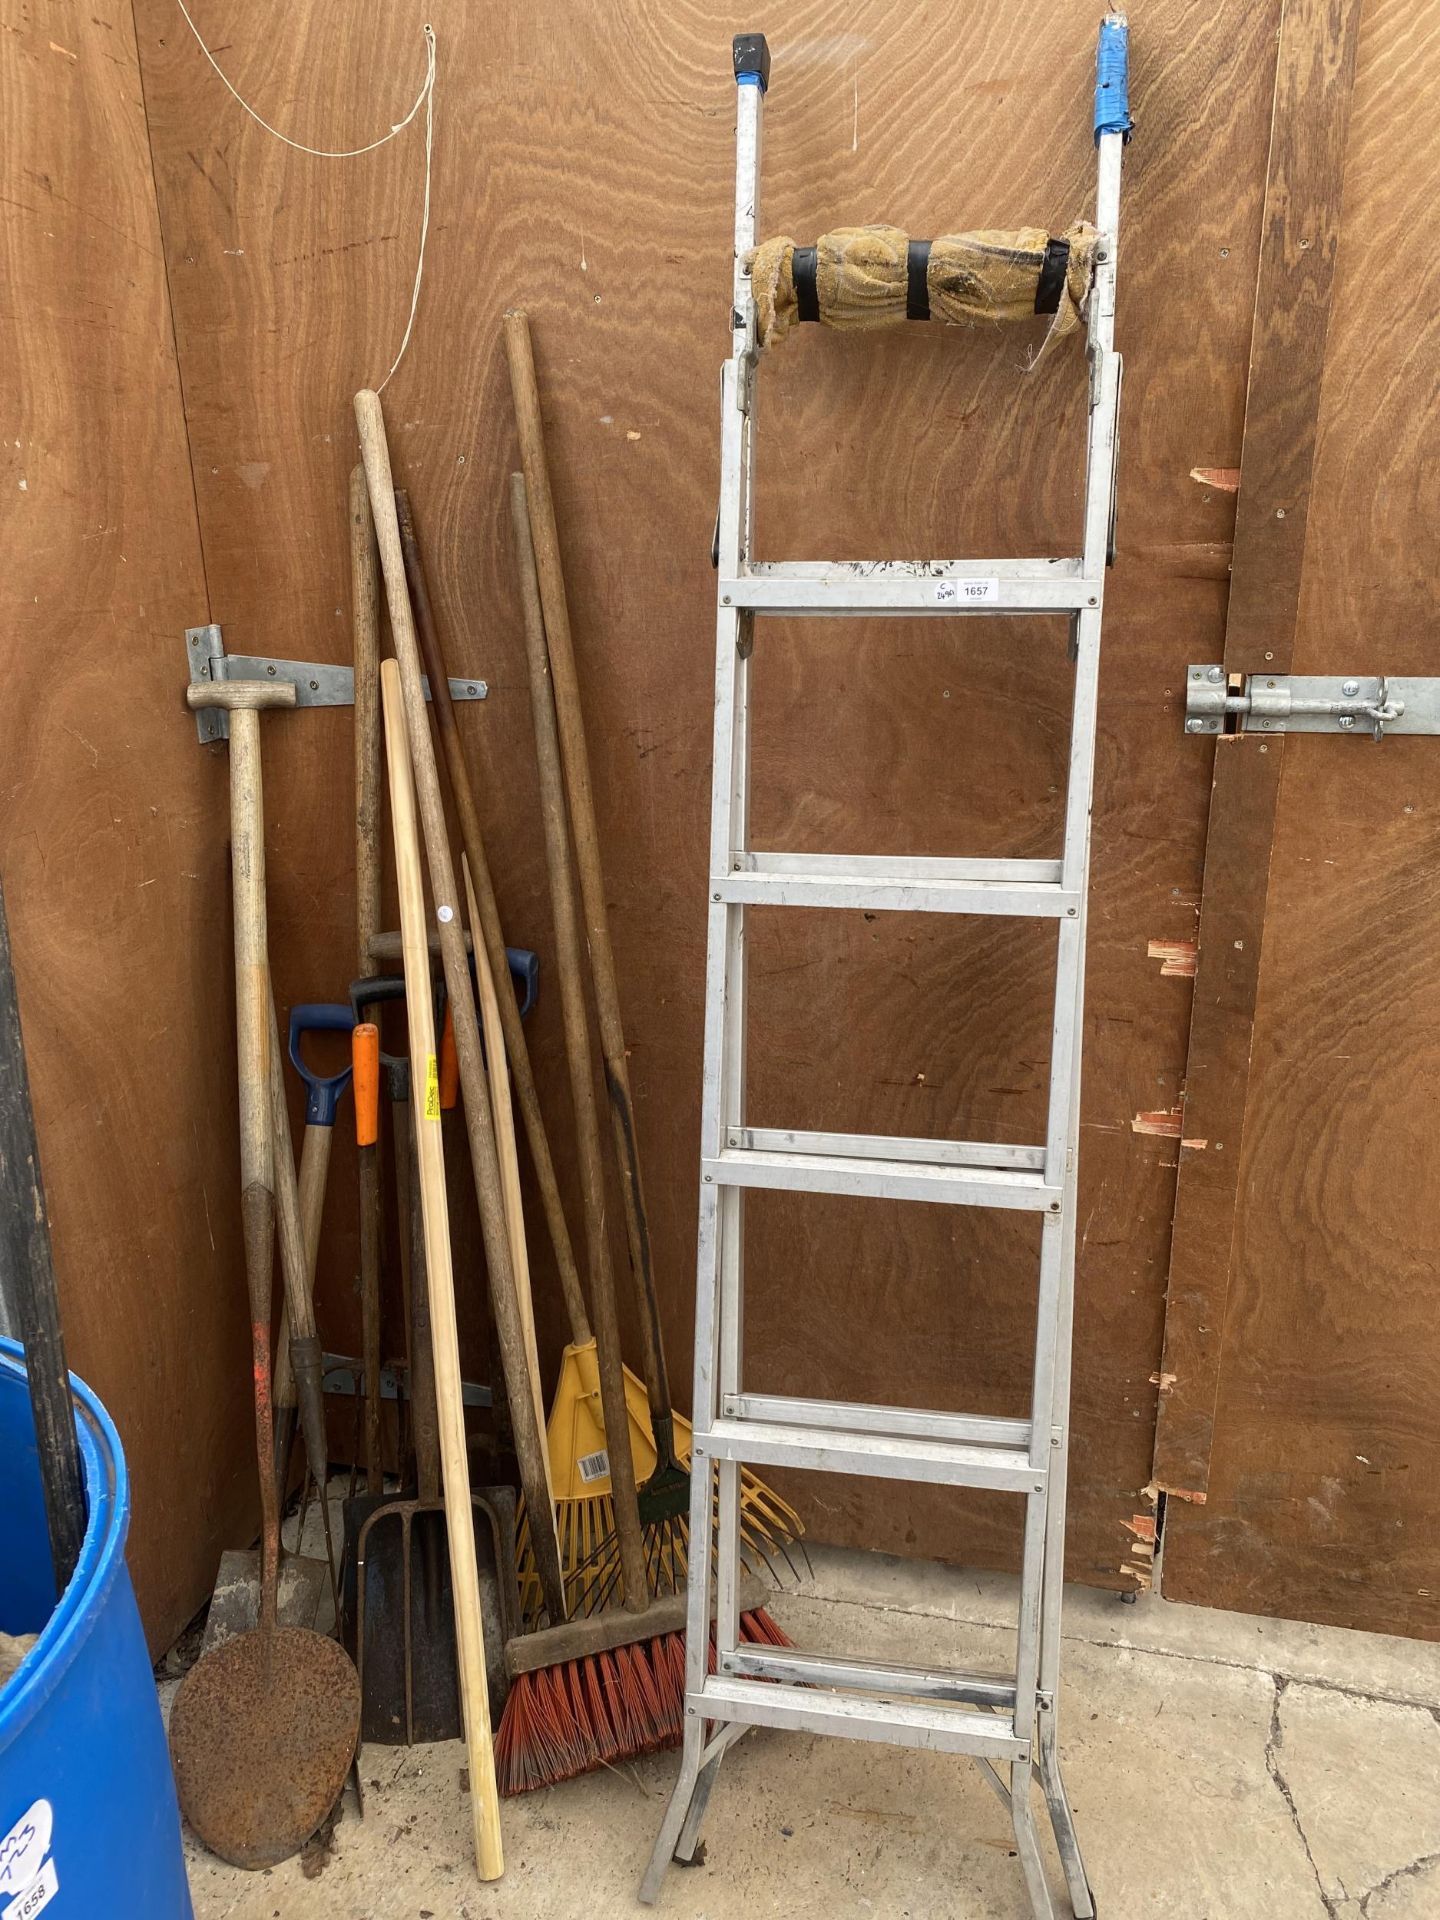 A SET OF STEP LADDERS AND ASSORTED GARDEN TOOLS ETC